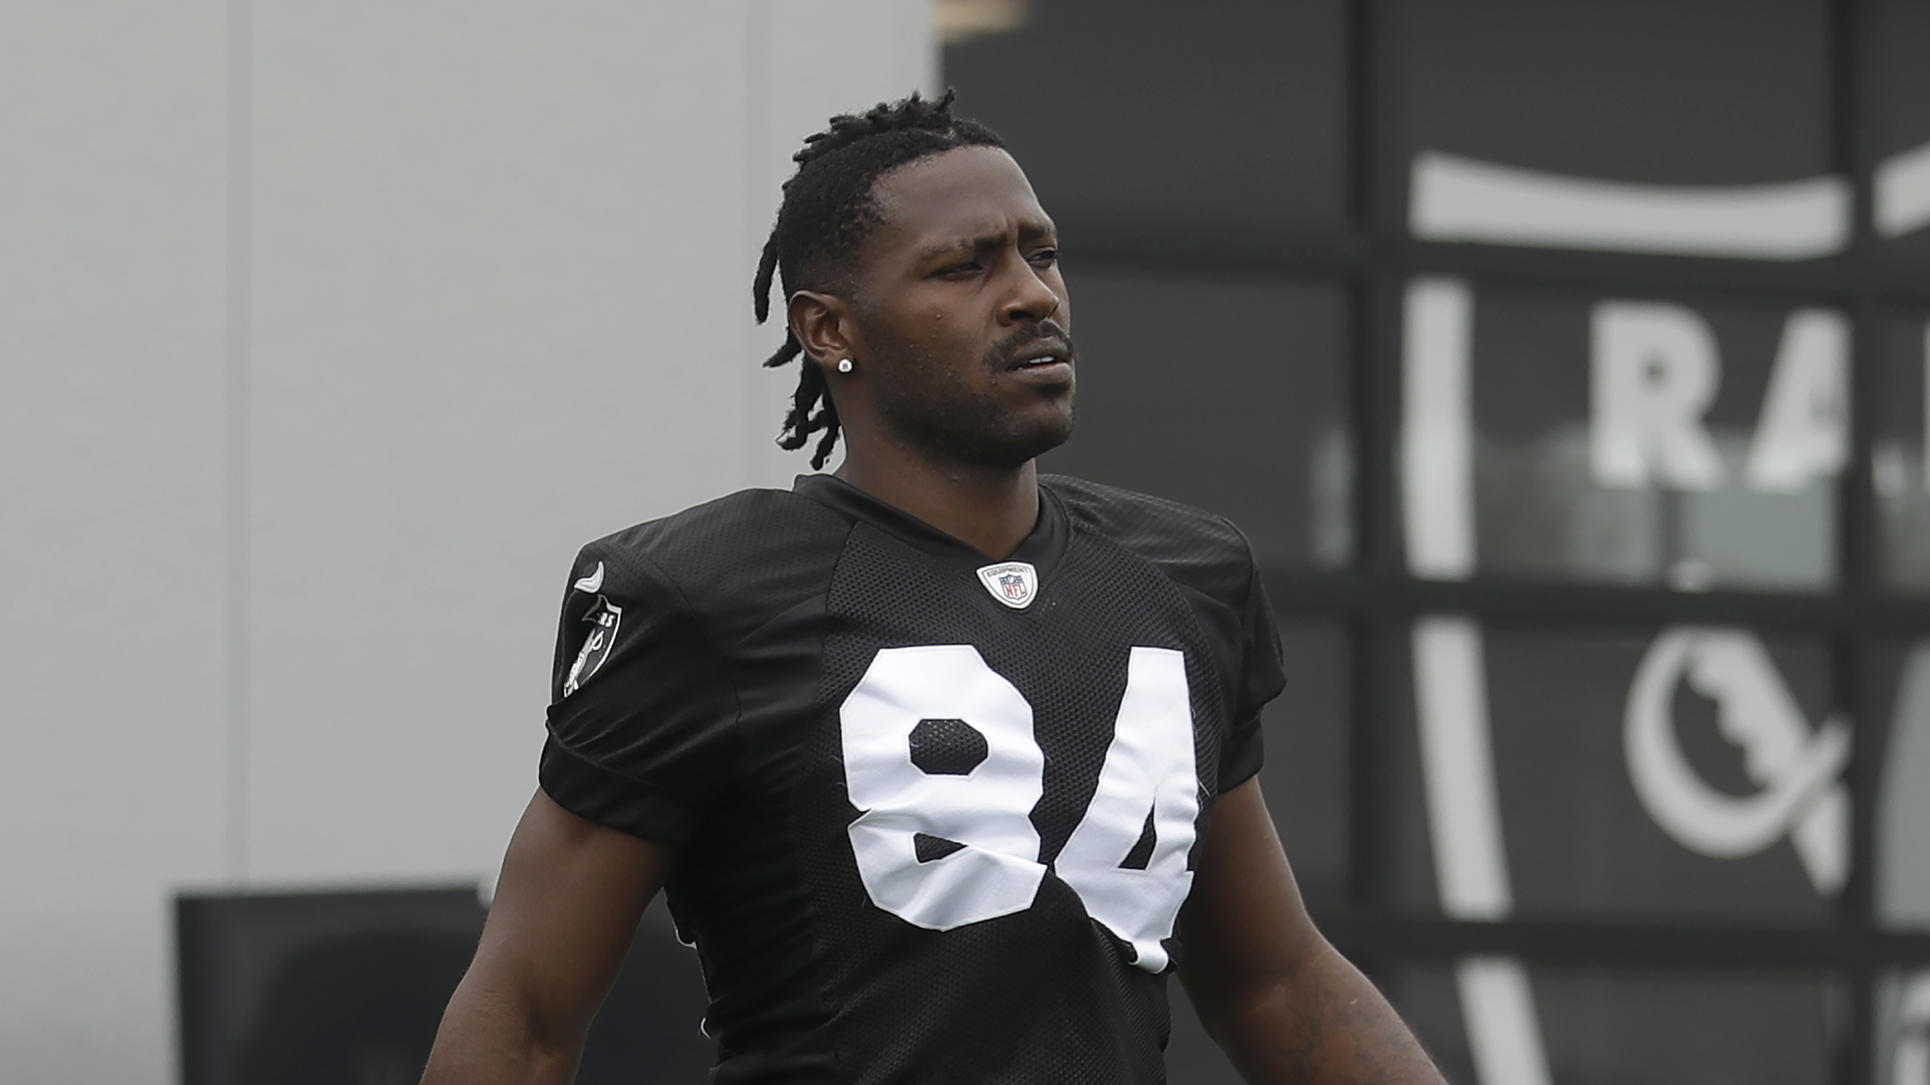 Early Retirement for Antonio Brown